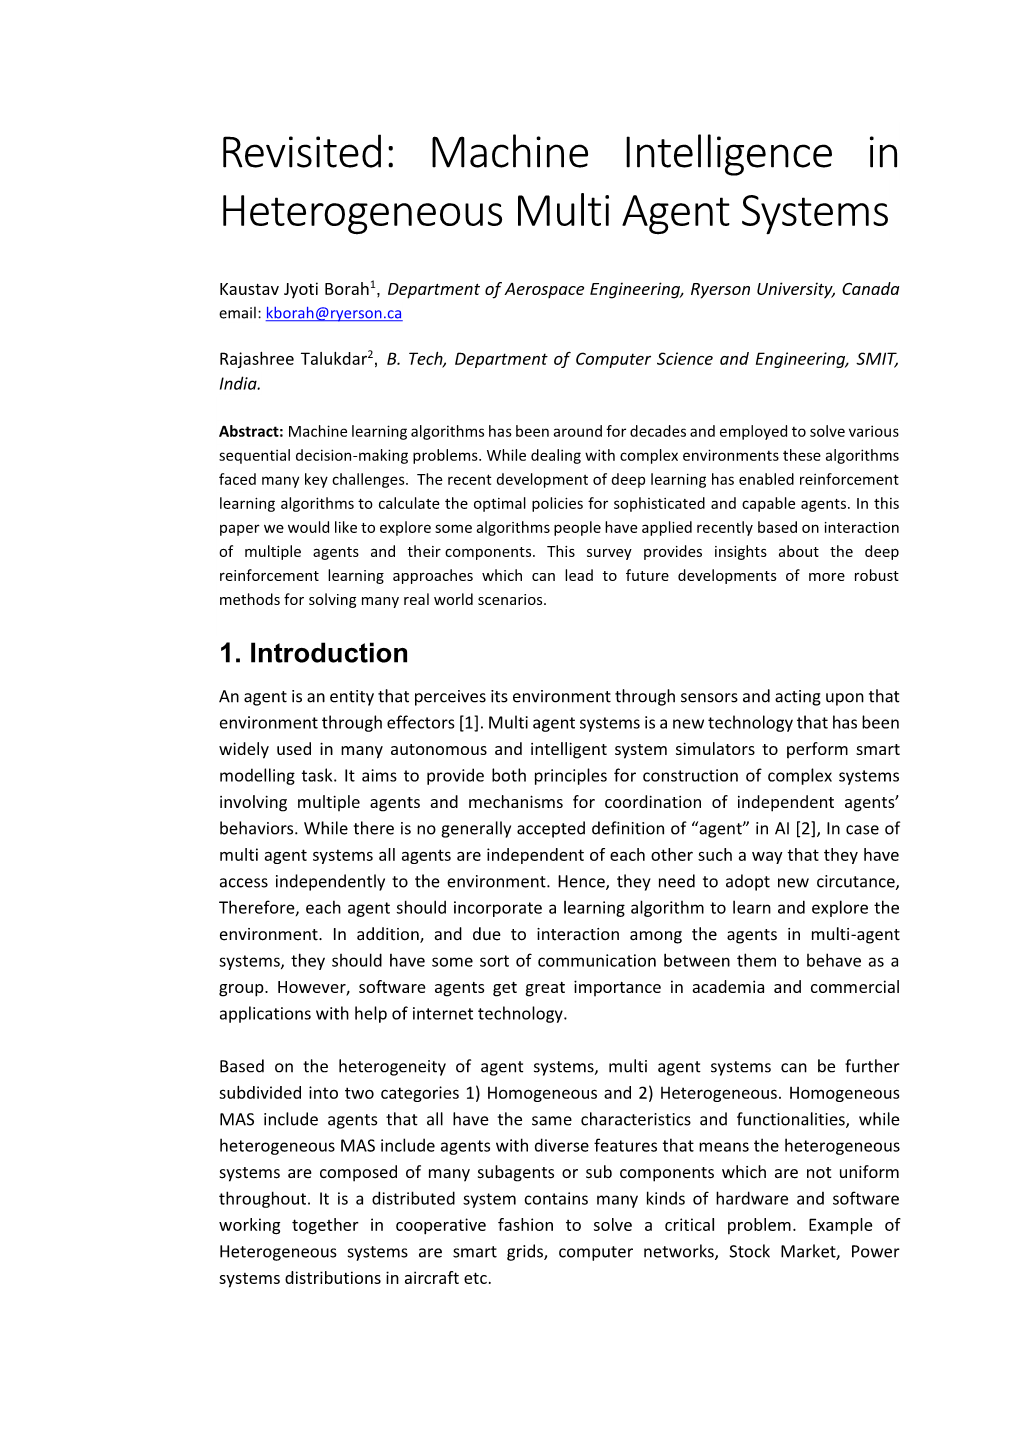 Revisited: Machine Intelligence in Heterogeneous Multi Agent Systems